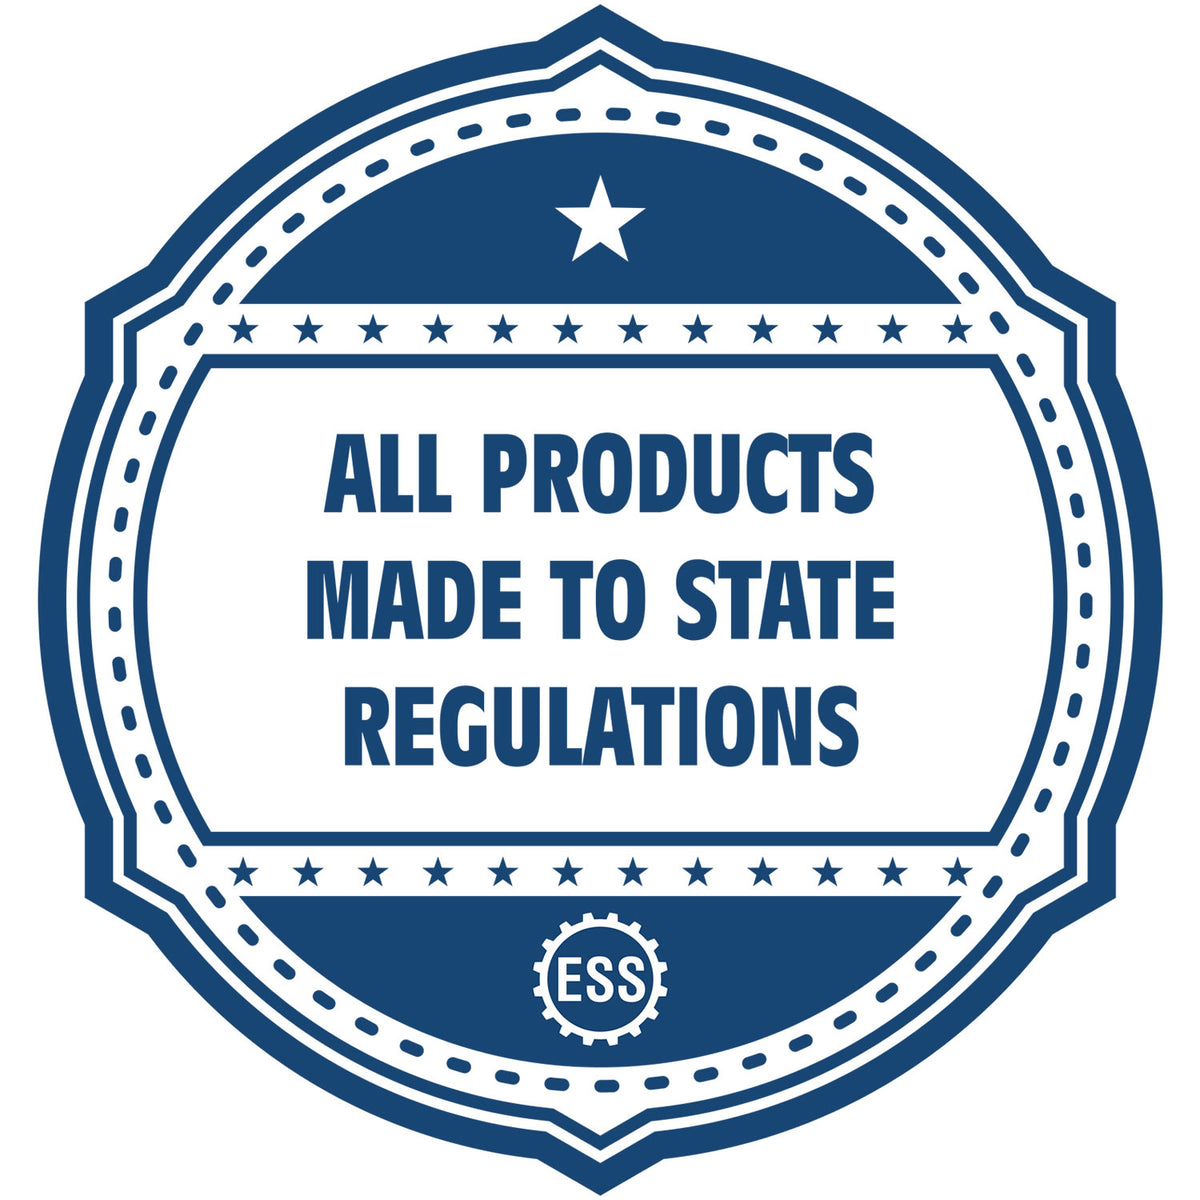 An icon or badge element for the Self-Inking Washington PE Stamp showing that this product is made in compliance with state regulations.